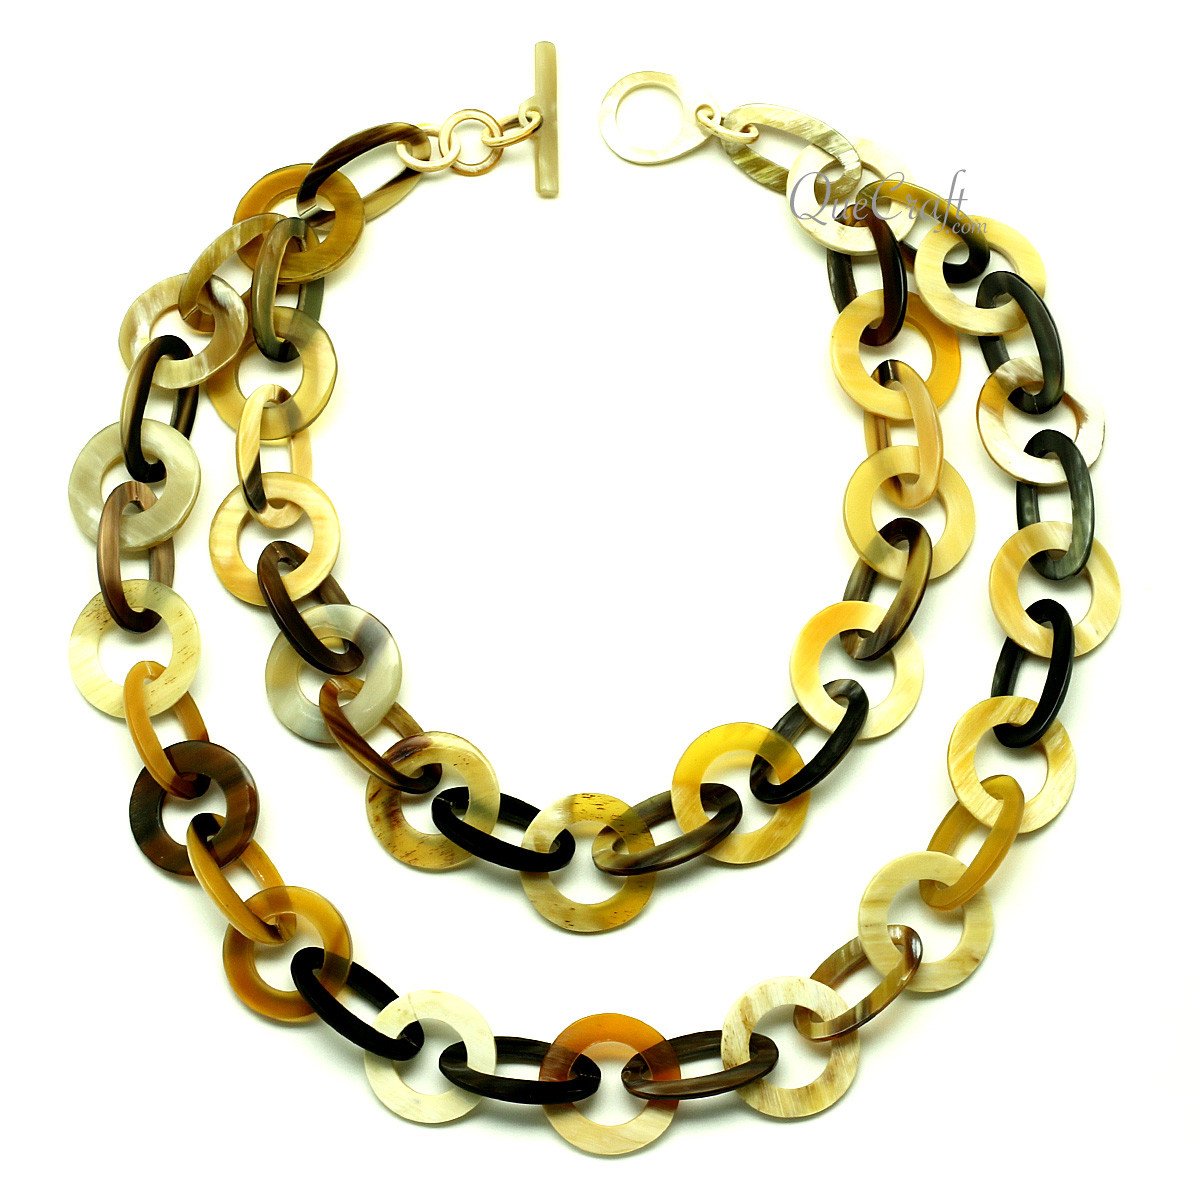 Horn Chain Necklace #12920 - HORN JEWELRY